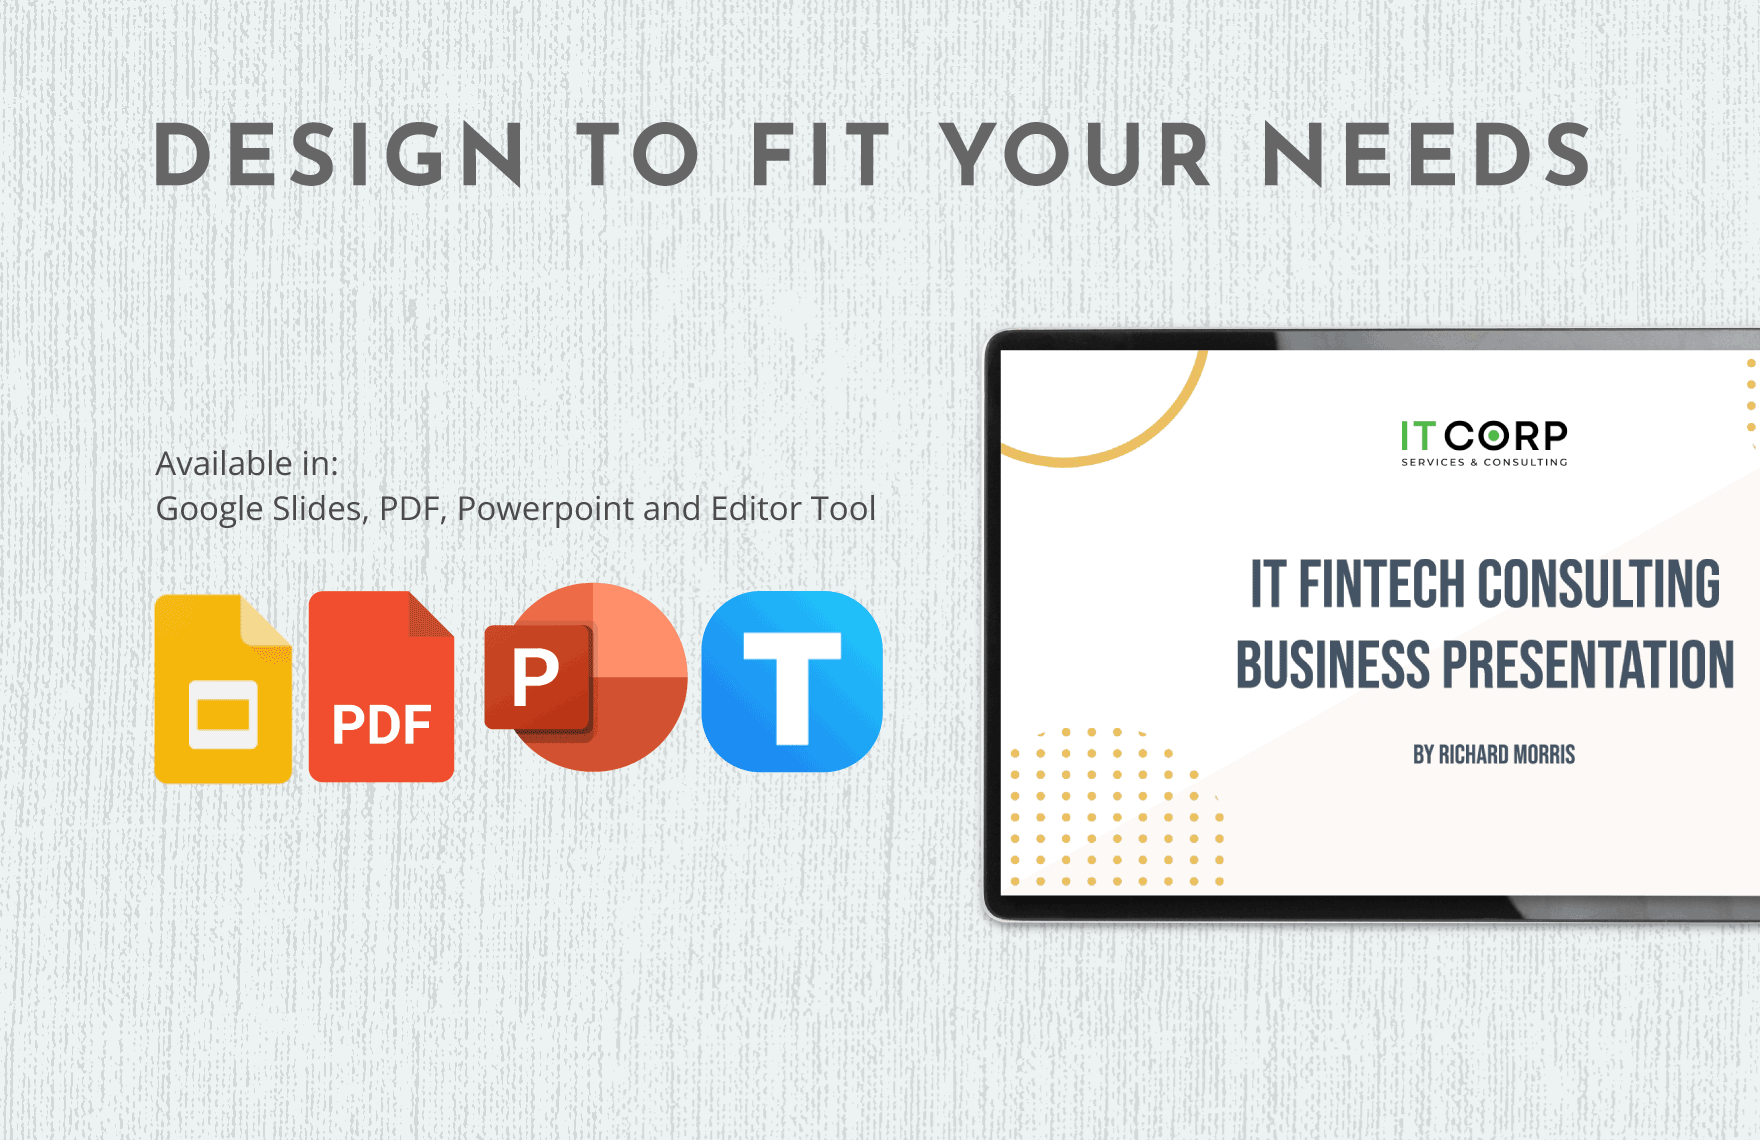 IT Fintech Consulting Business Presentation Template